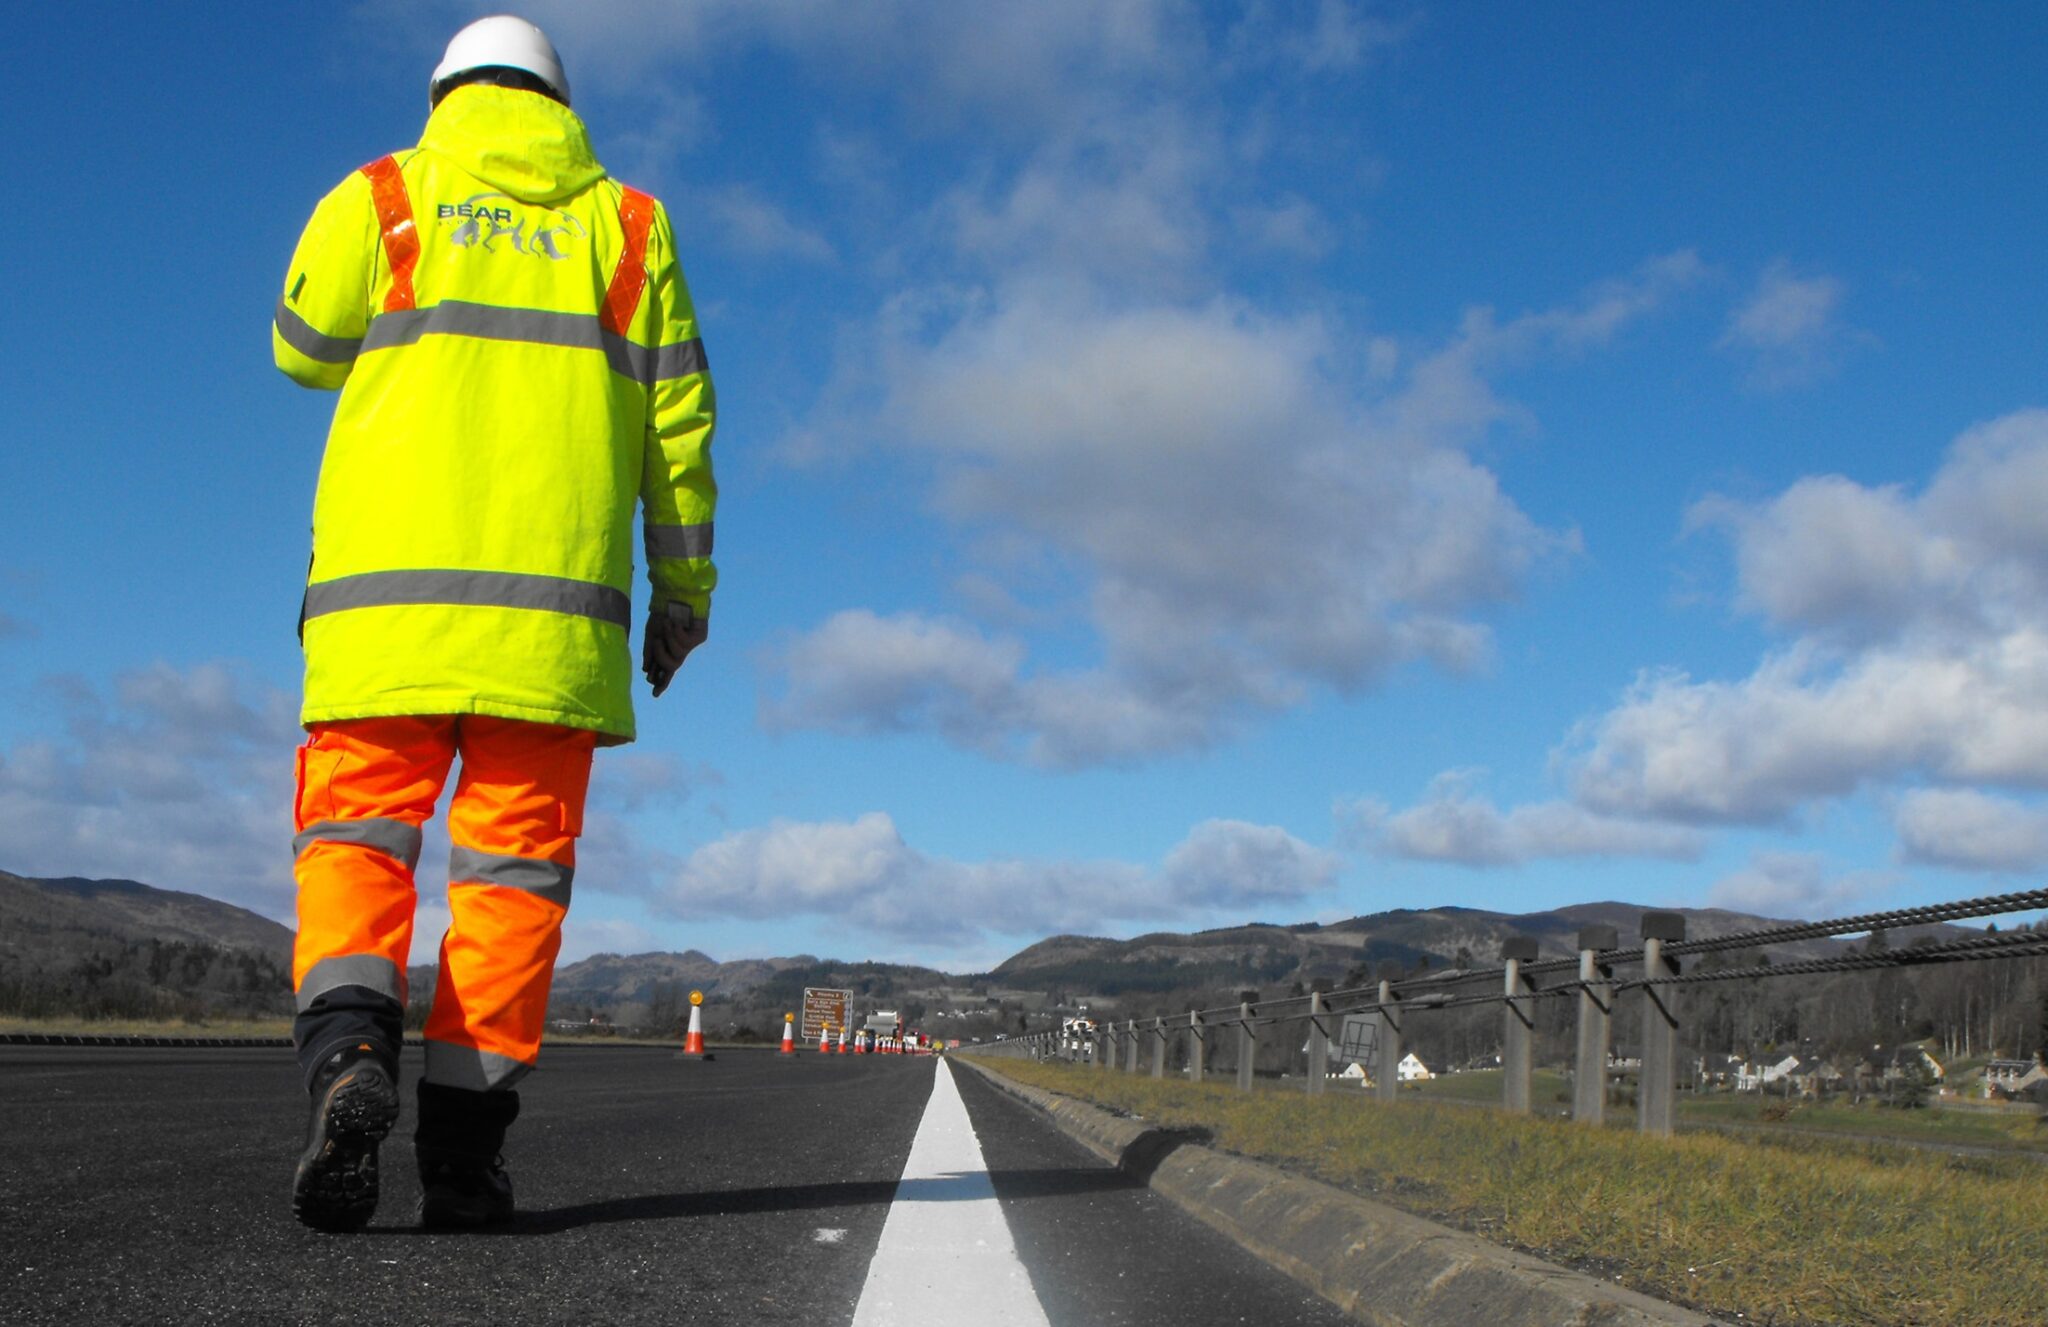 ROAD IMPROVEMENTS FOR THE A9 BALLINLUIG NORTHBOUND SLIP ROADS